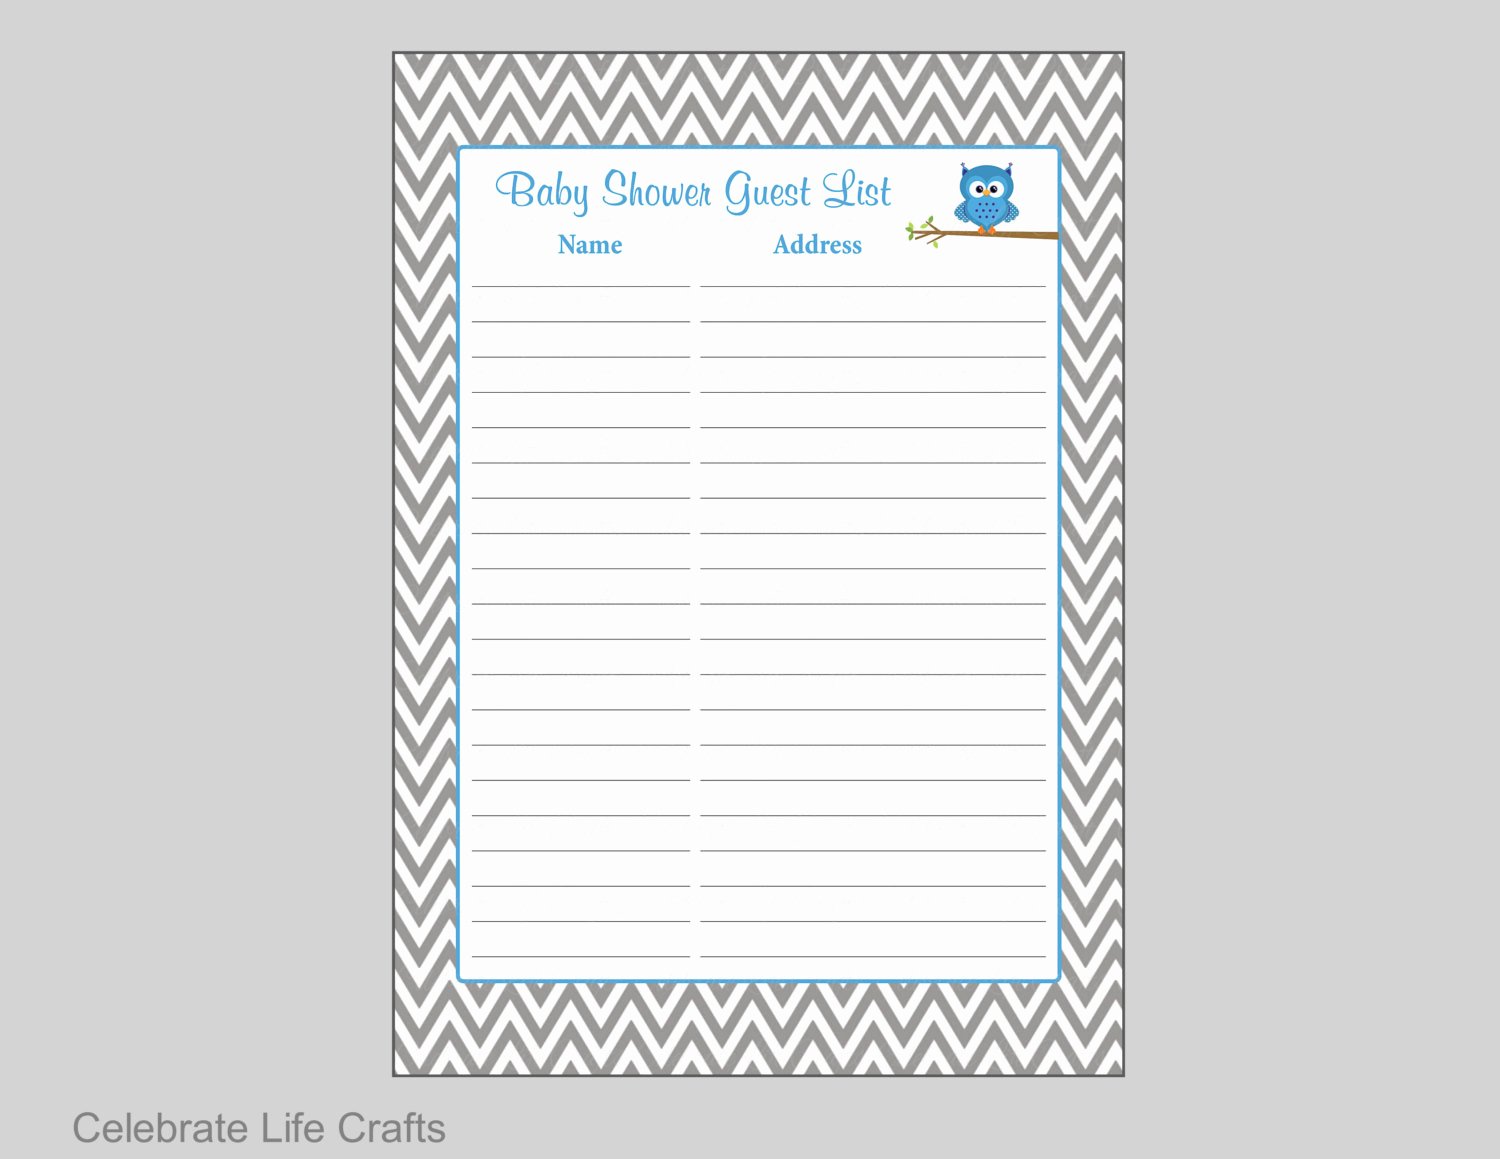 Baby Shower Sign In Sheets Beautiful Owl Baby Shower Guest List Printable Baby Shower Sign In